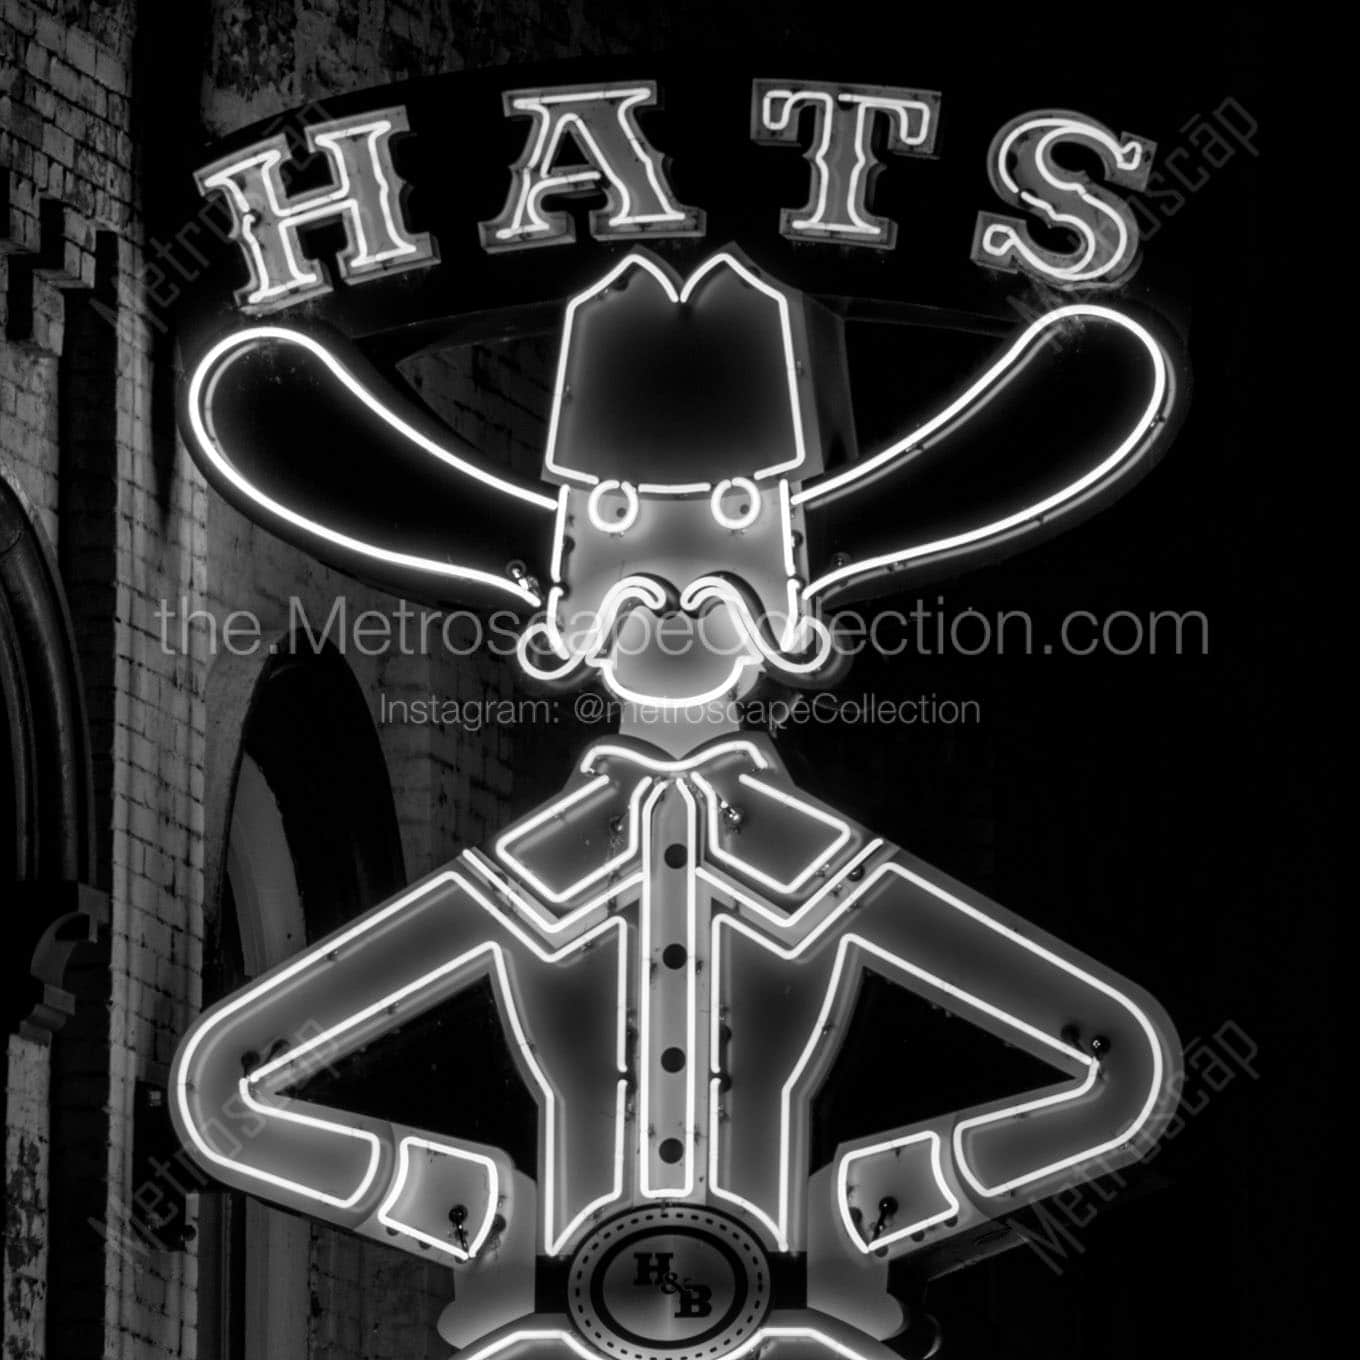 hat and boots neon sign Black & White Wall Art